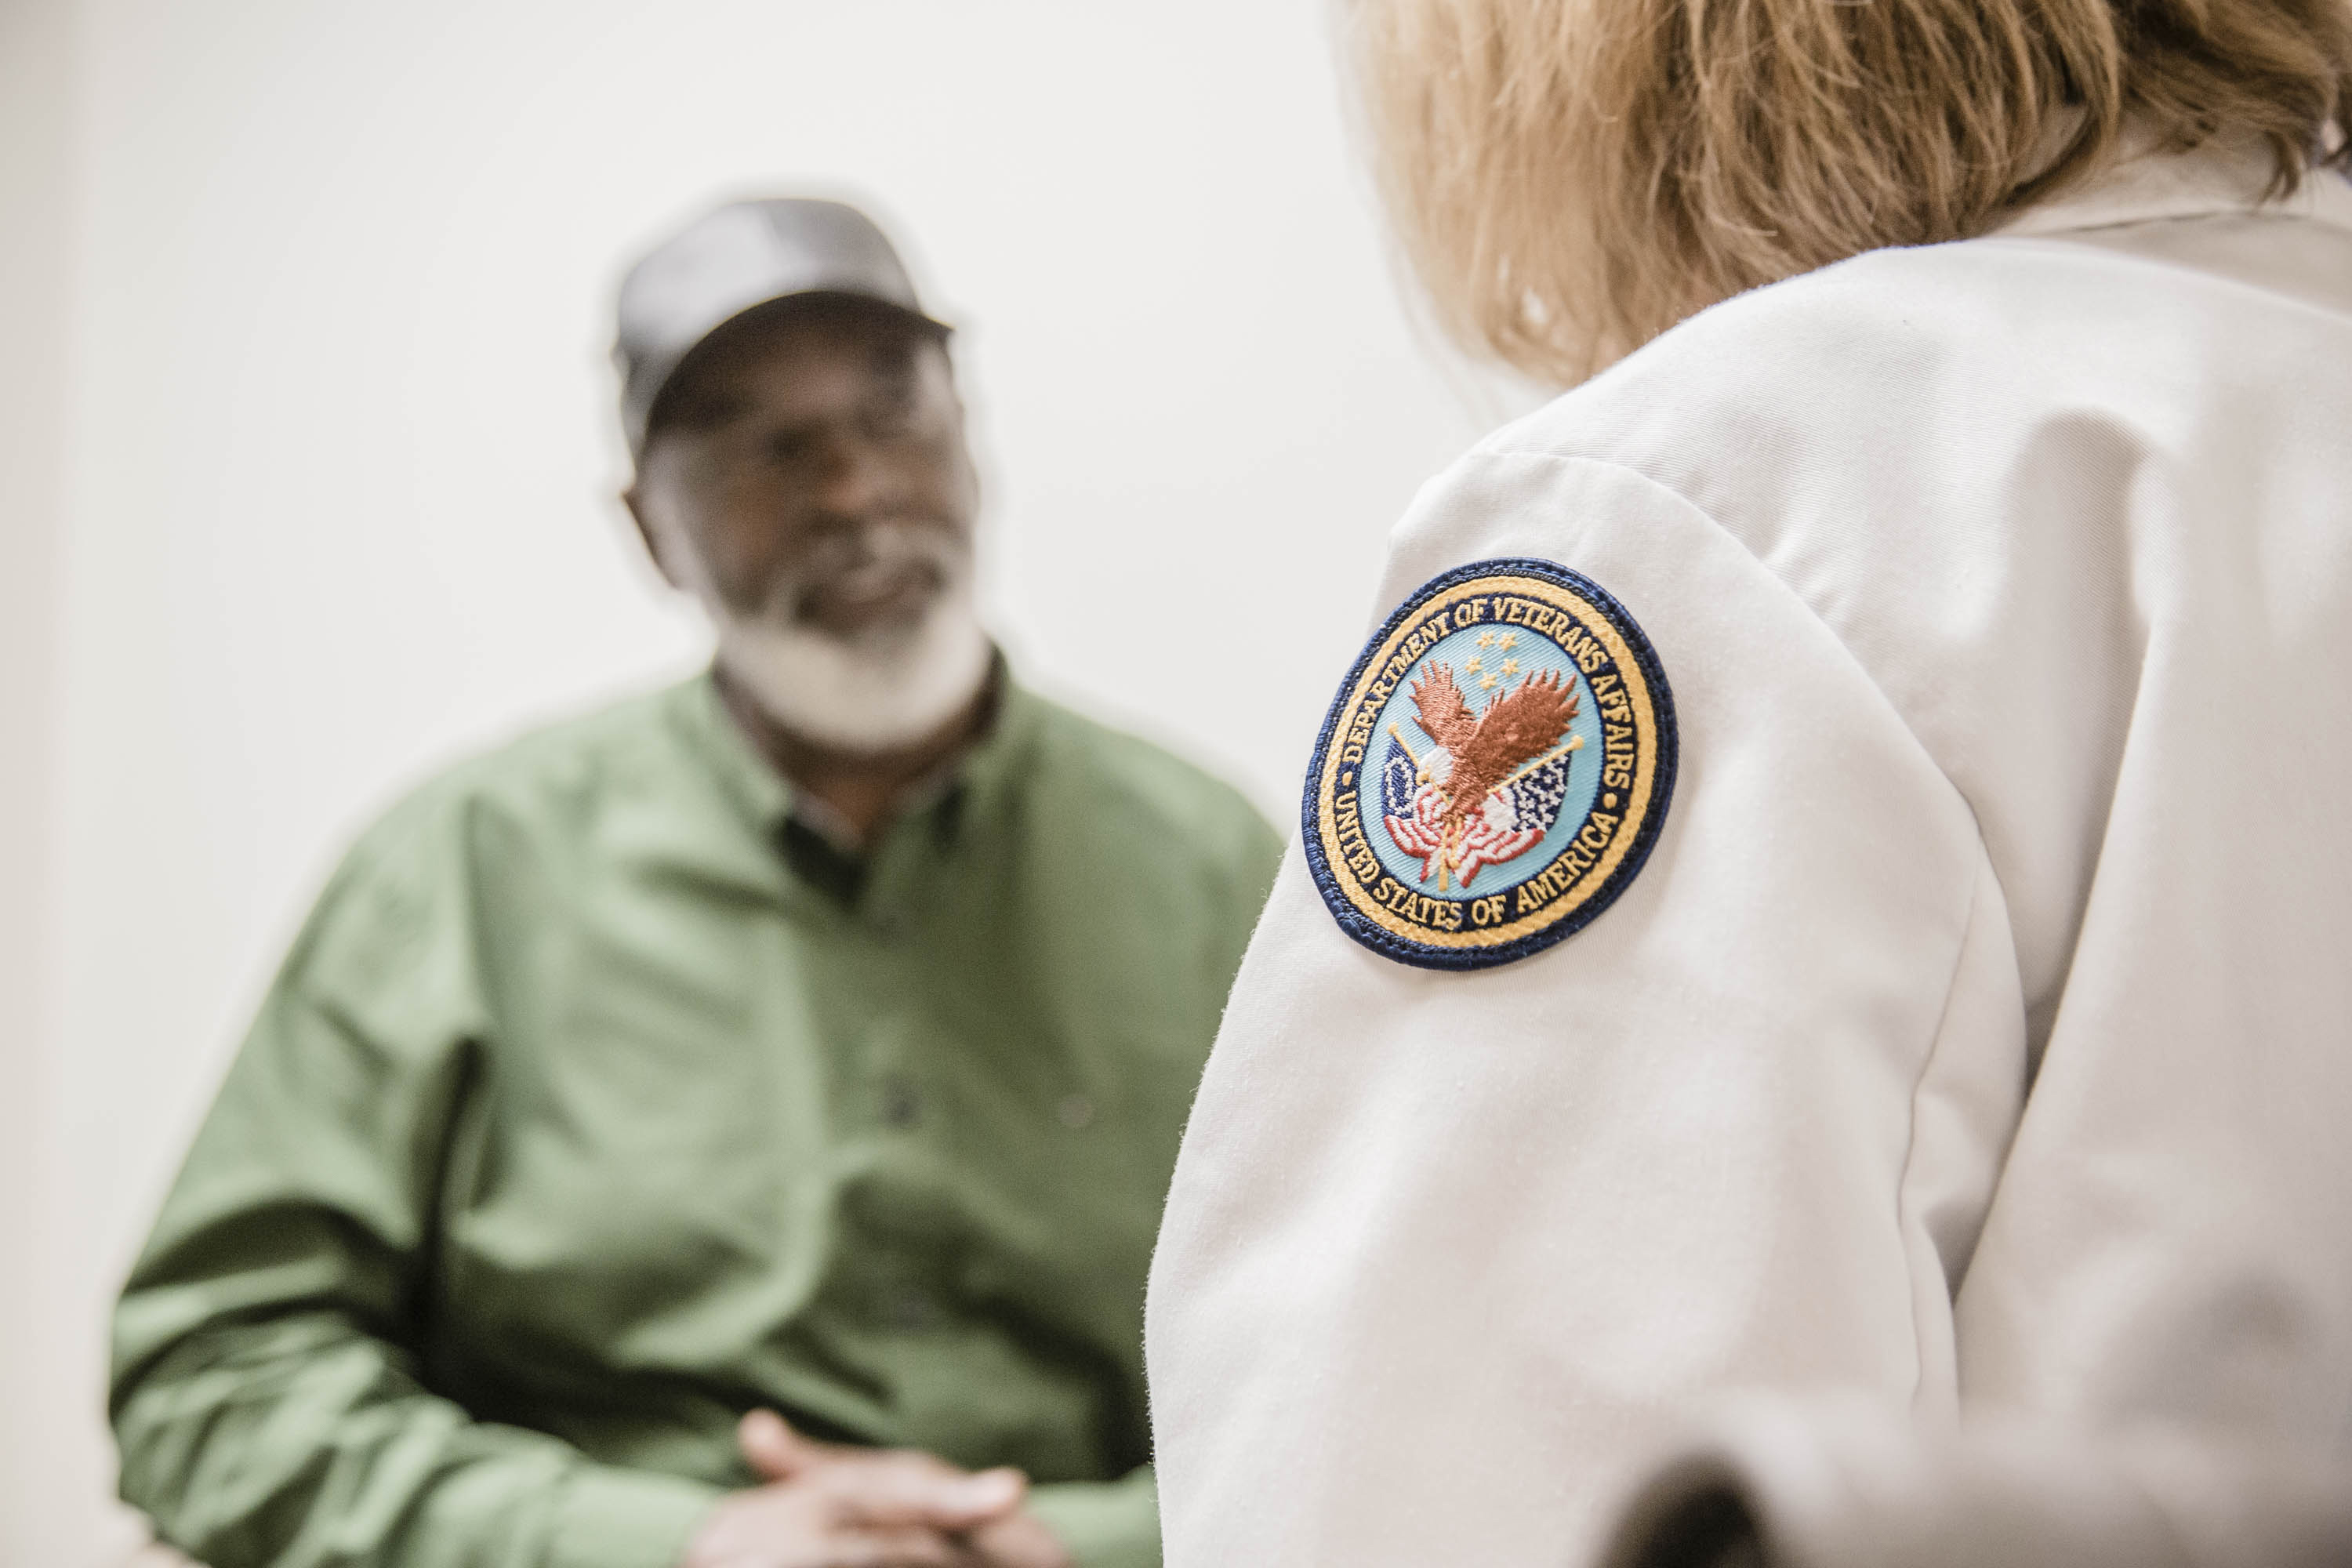 The Department of Veterans Affairs (VA) remains proactive in the care of Veterans thanks to its integrated model of care